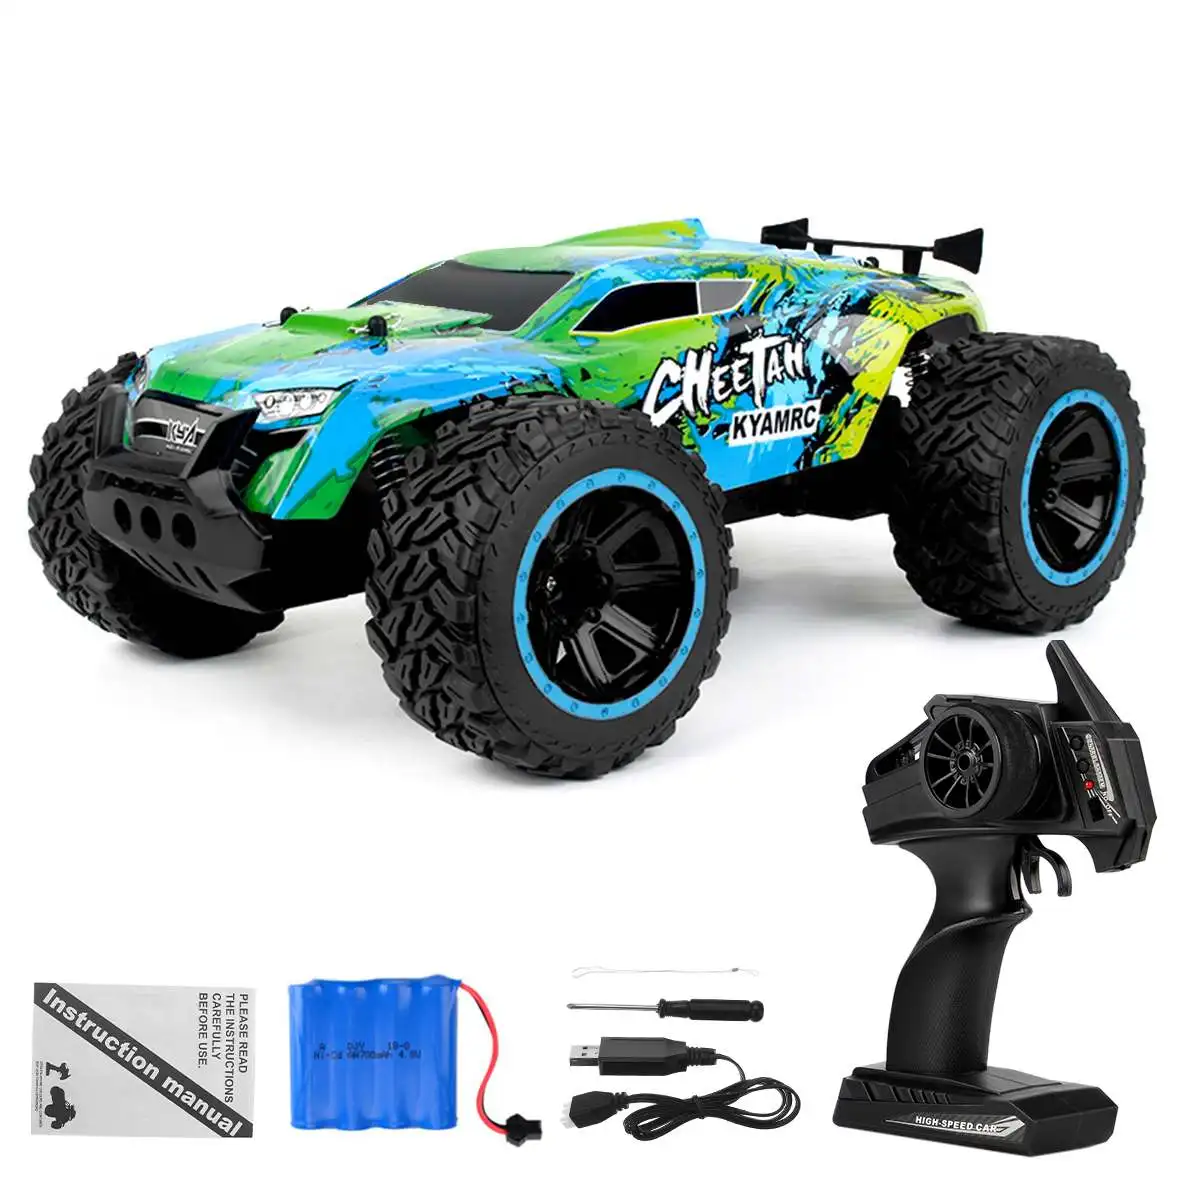 

1/14 2.4G 2WD RC Car Radio Controlled Car High Speed Drift Racing Remote Control Cars Off Road Vehicle Toys for Children